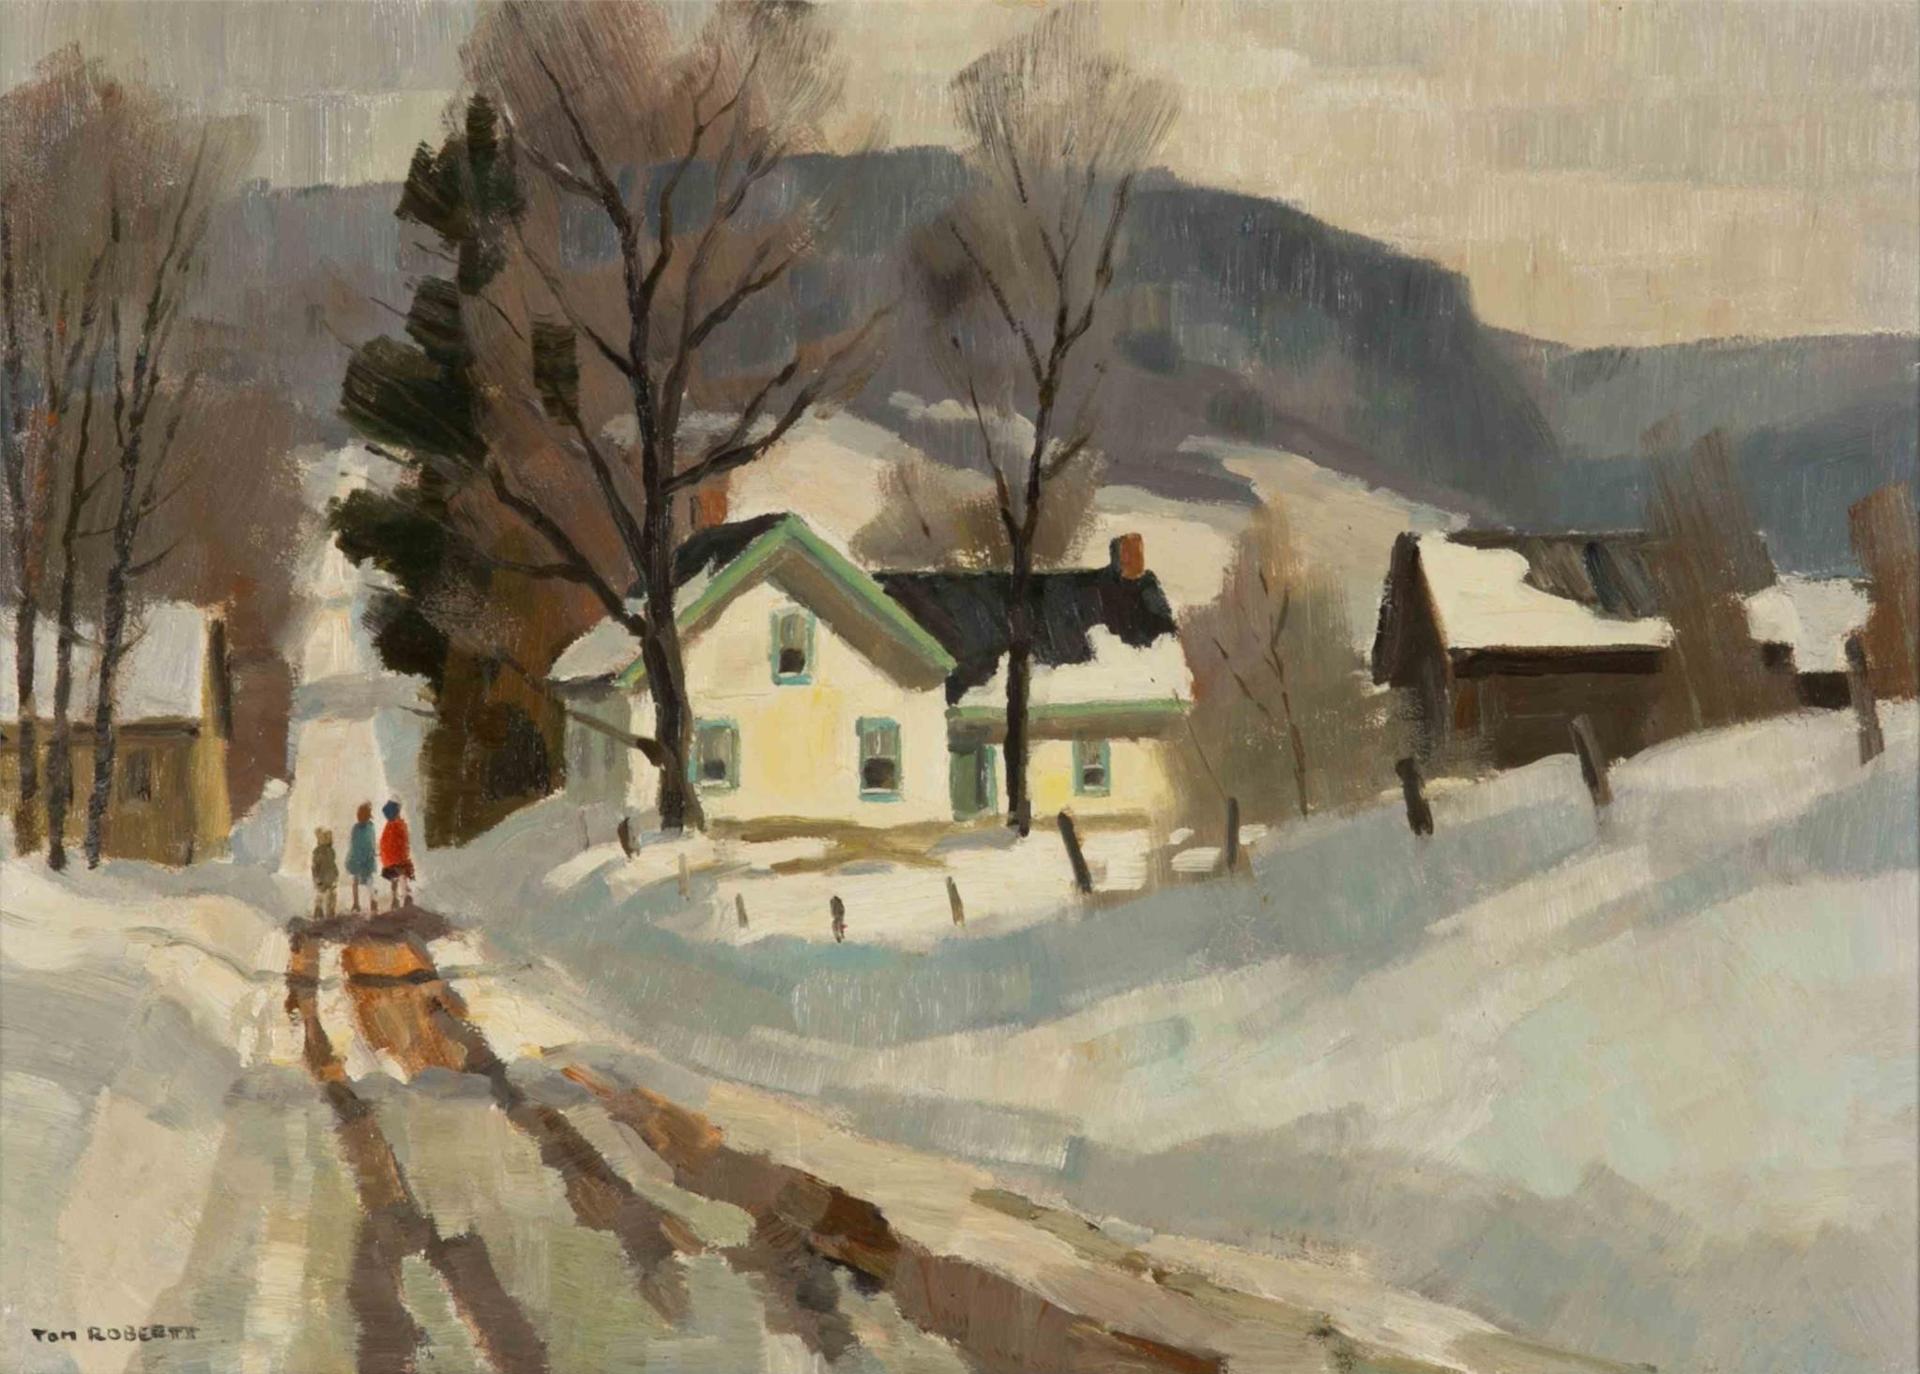 Thomas Keith (Tom) Roberts (1909-1998) - Road to Campbellville (1969)